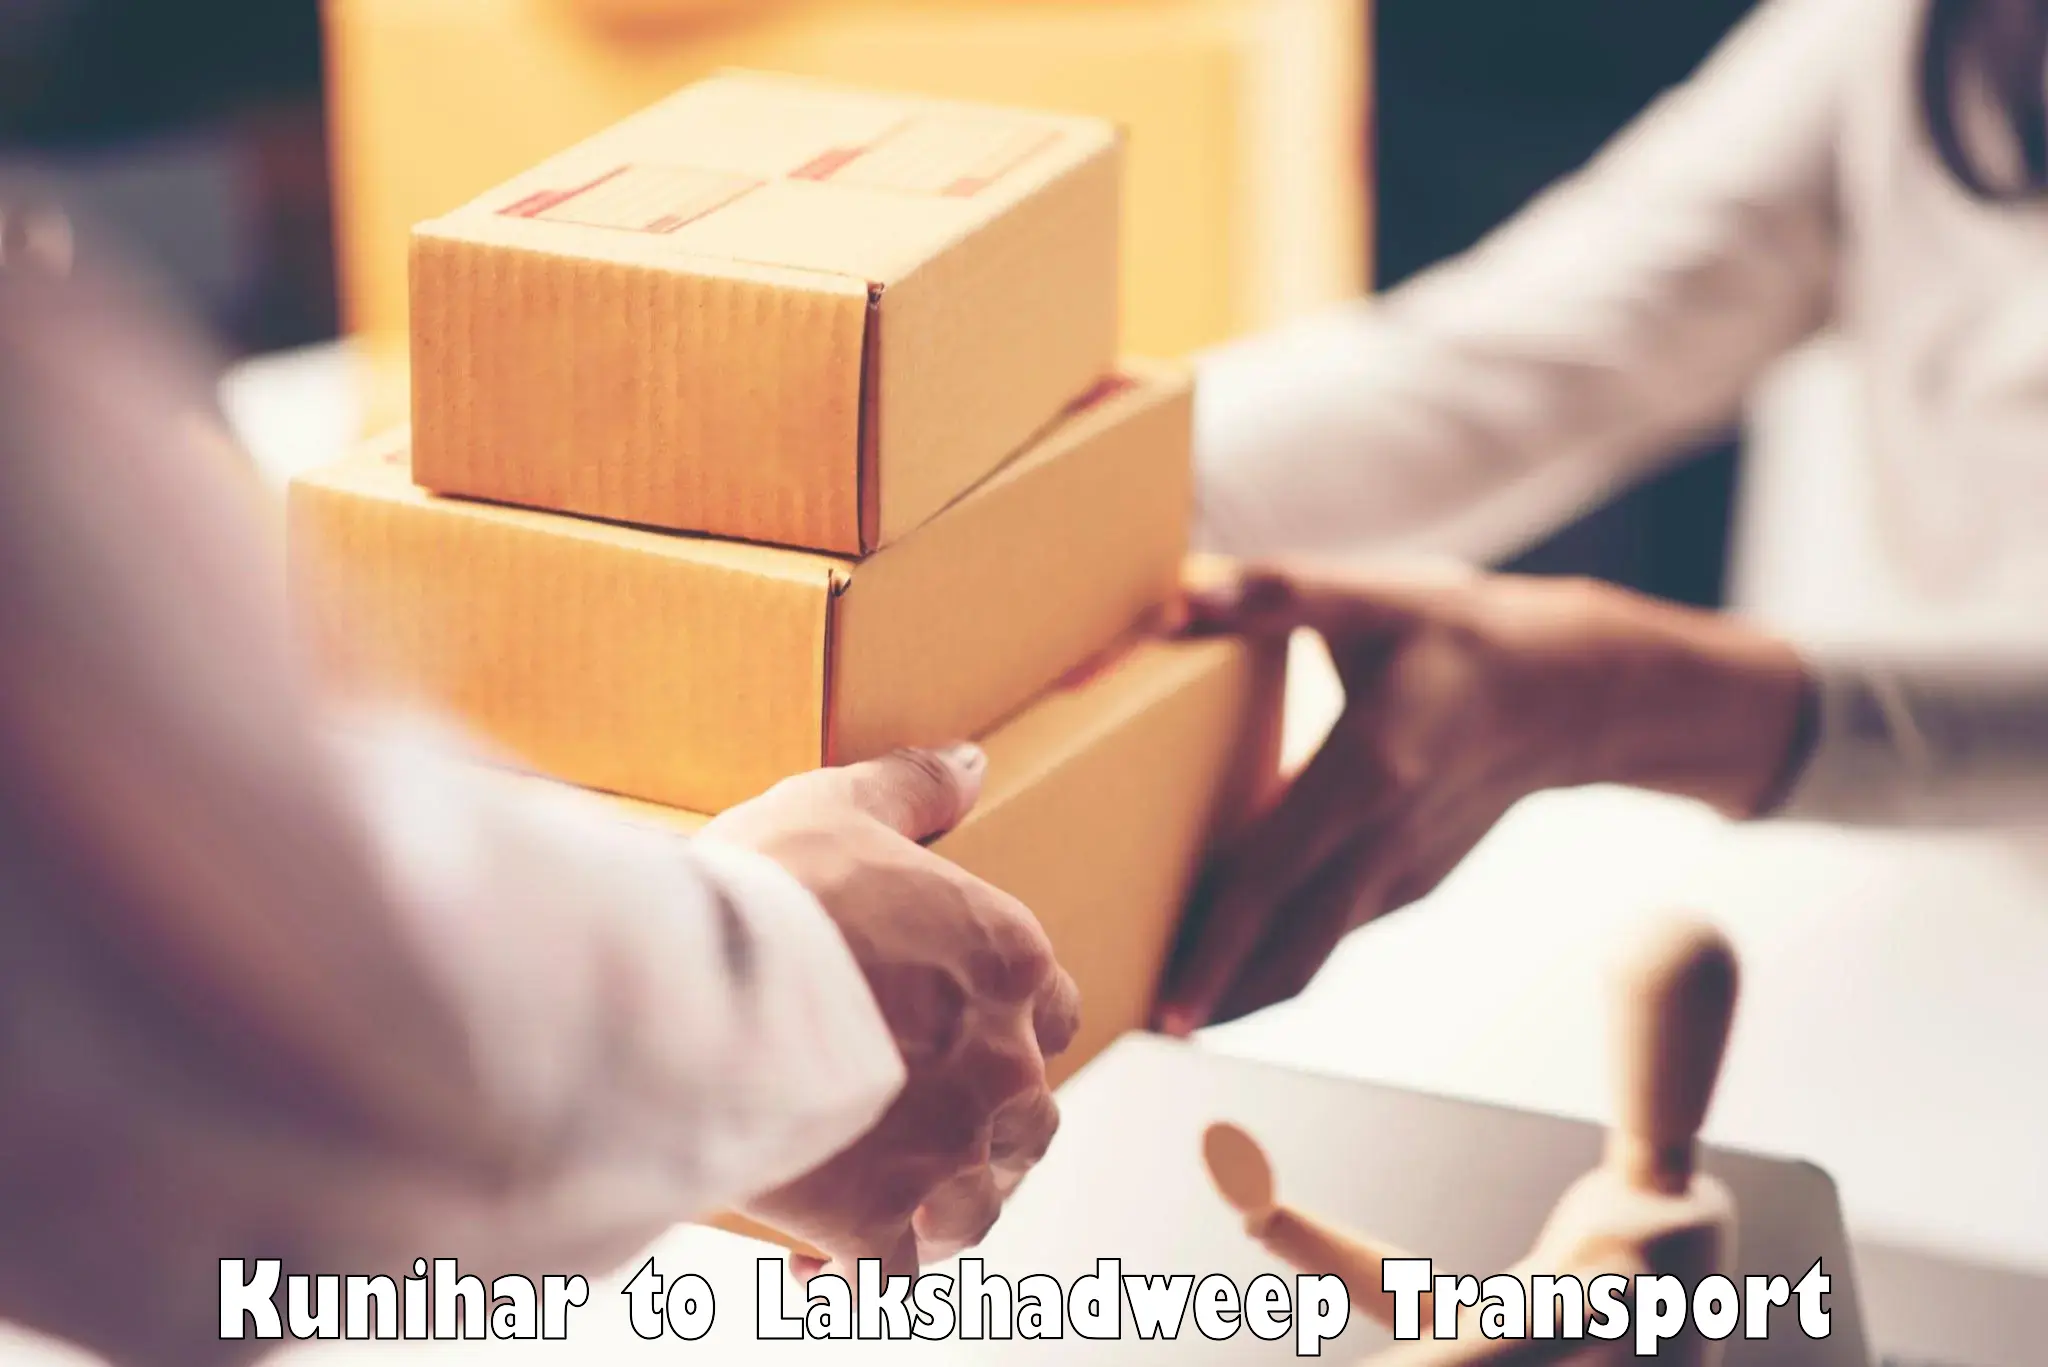 Container transport service Kunihar to Lakshadweep